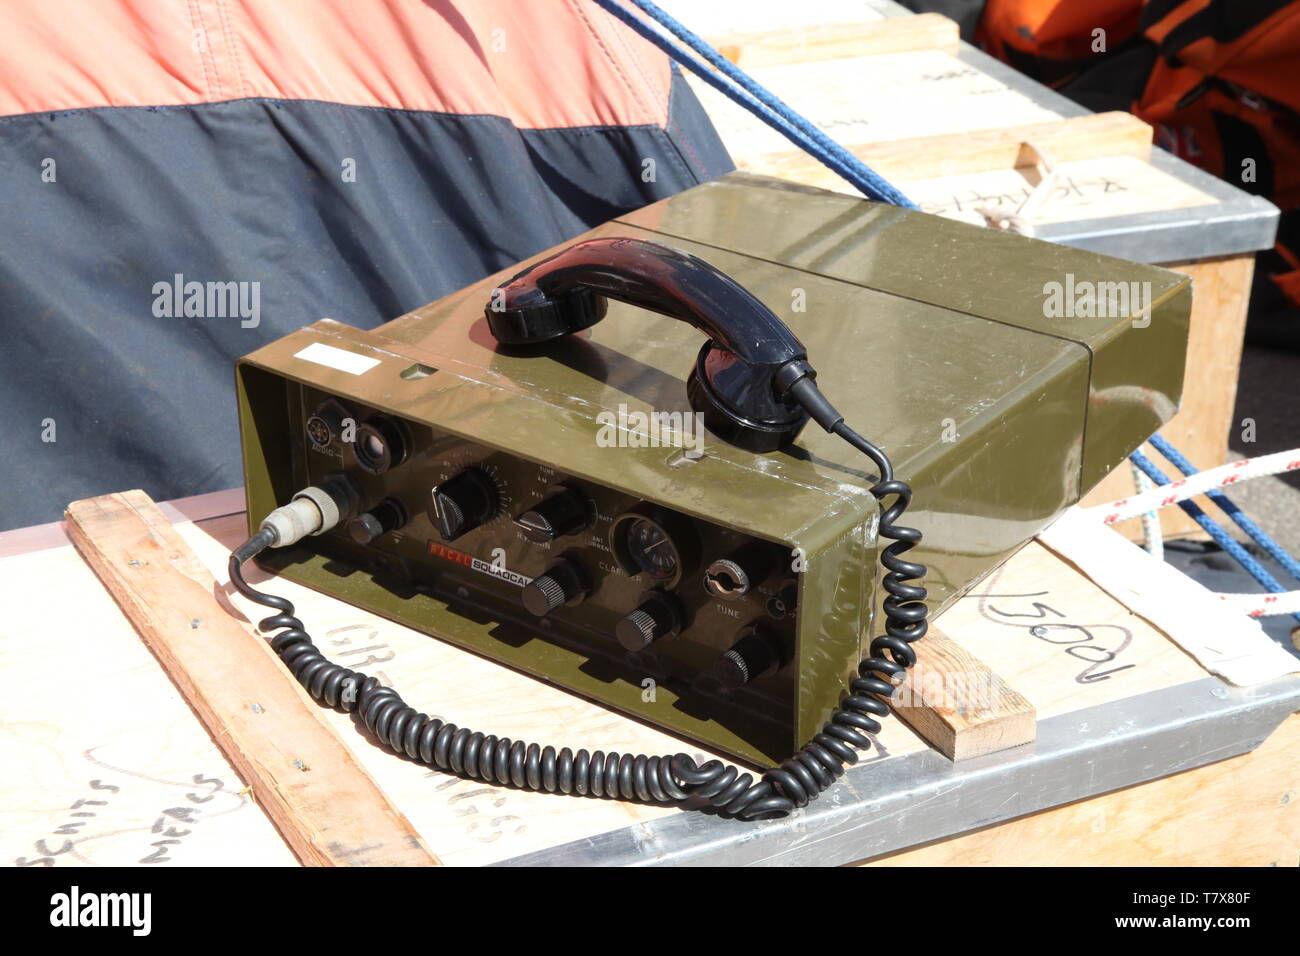 Racal TRA 906 Squadcal military transceiver radio with handset in day Stock Photo